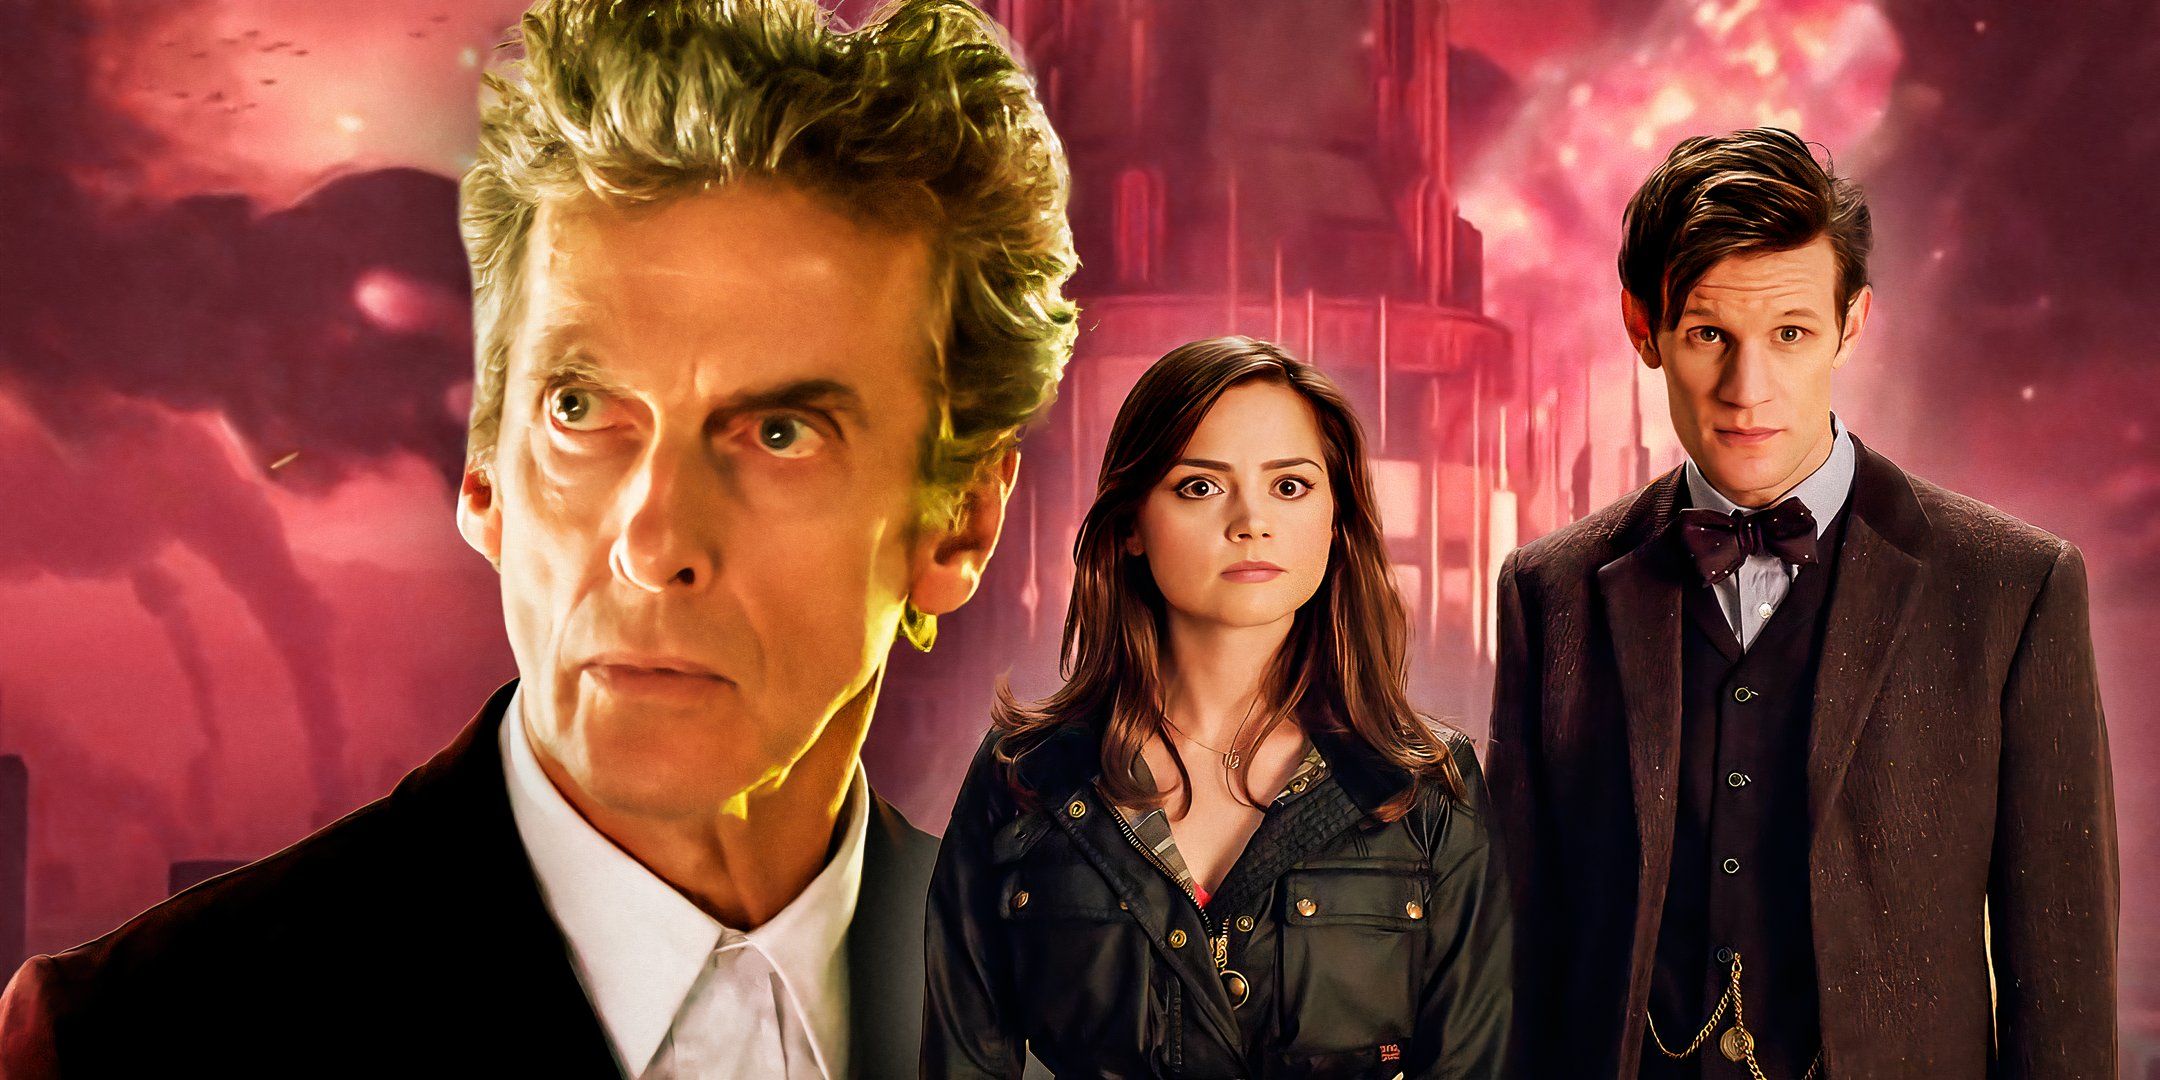 Matt Smith as the Eleventh Doctor, Peter Capaldi as the Twelfth Doctor, and Jenna Coleman as Clara Oswald in Doctor Who